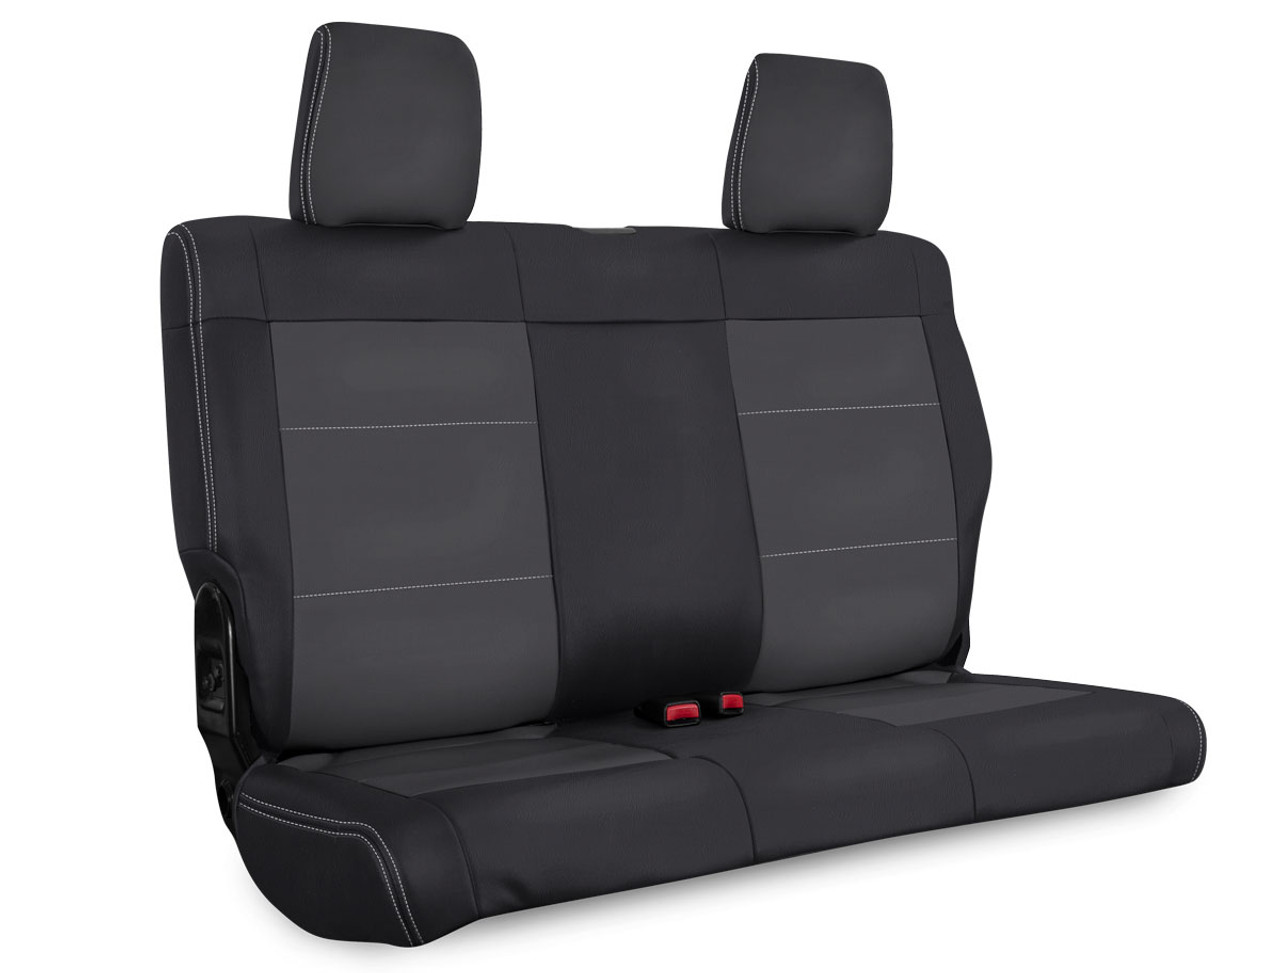 Rear Seat Cover for '07'10 Jeep Wrangler JK, 4 door - Black and grey